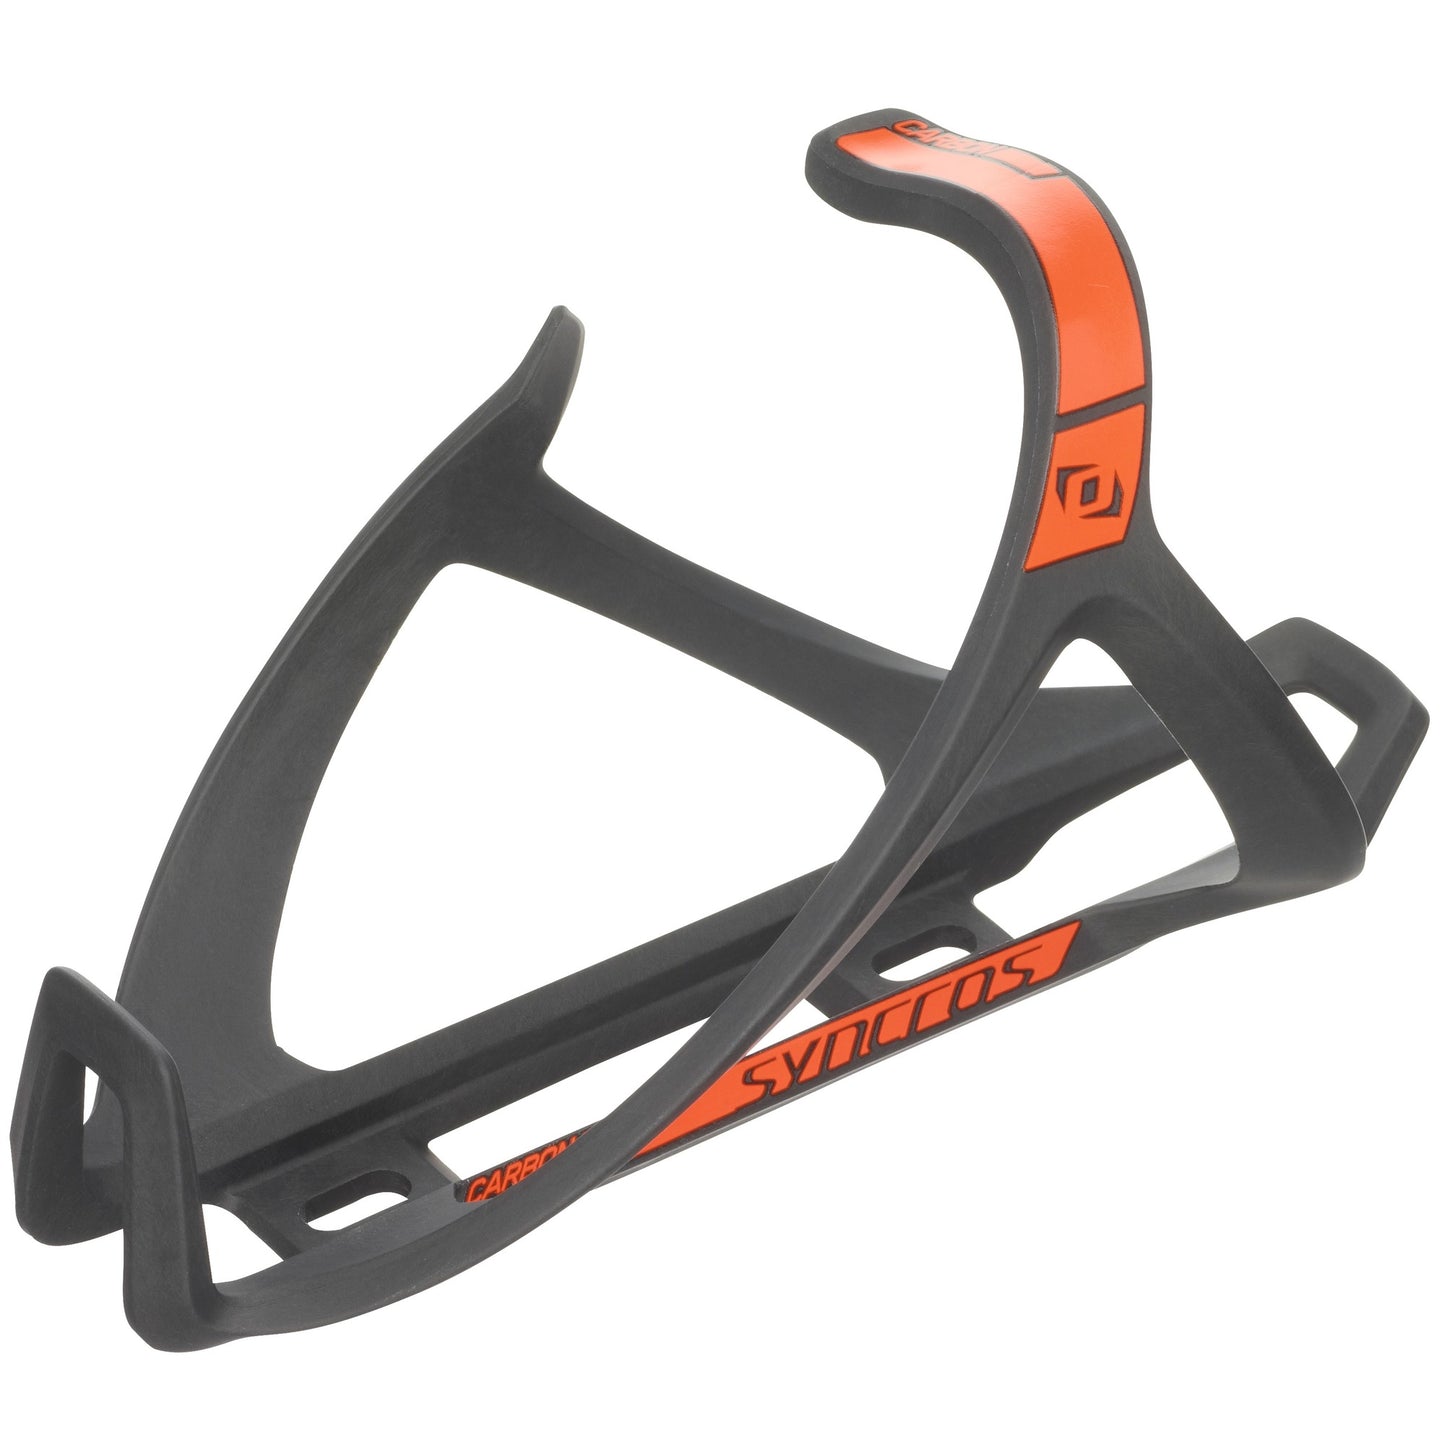 Syncros Bottle Cage Tailor cage 1.0 left